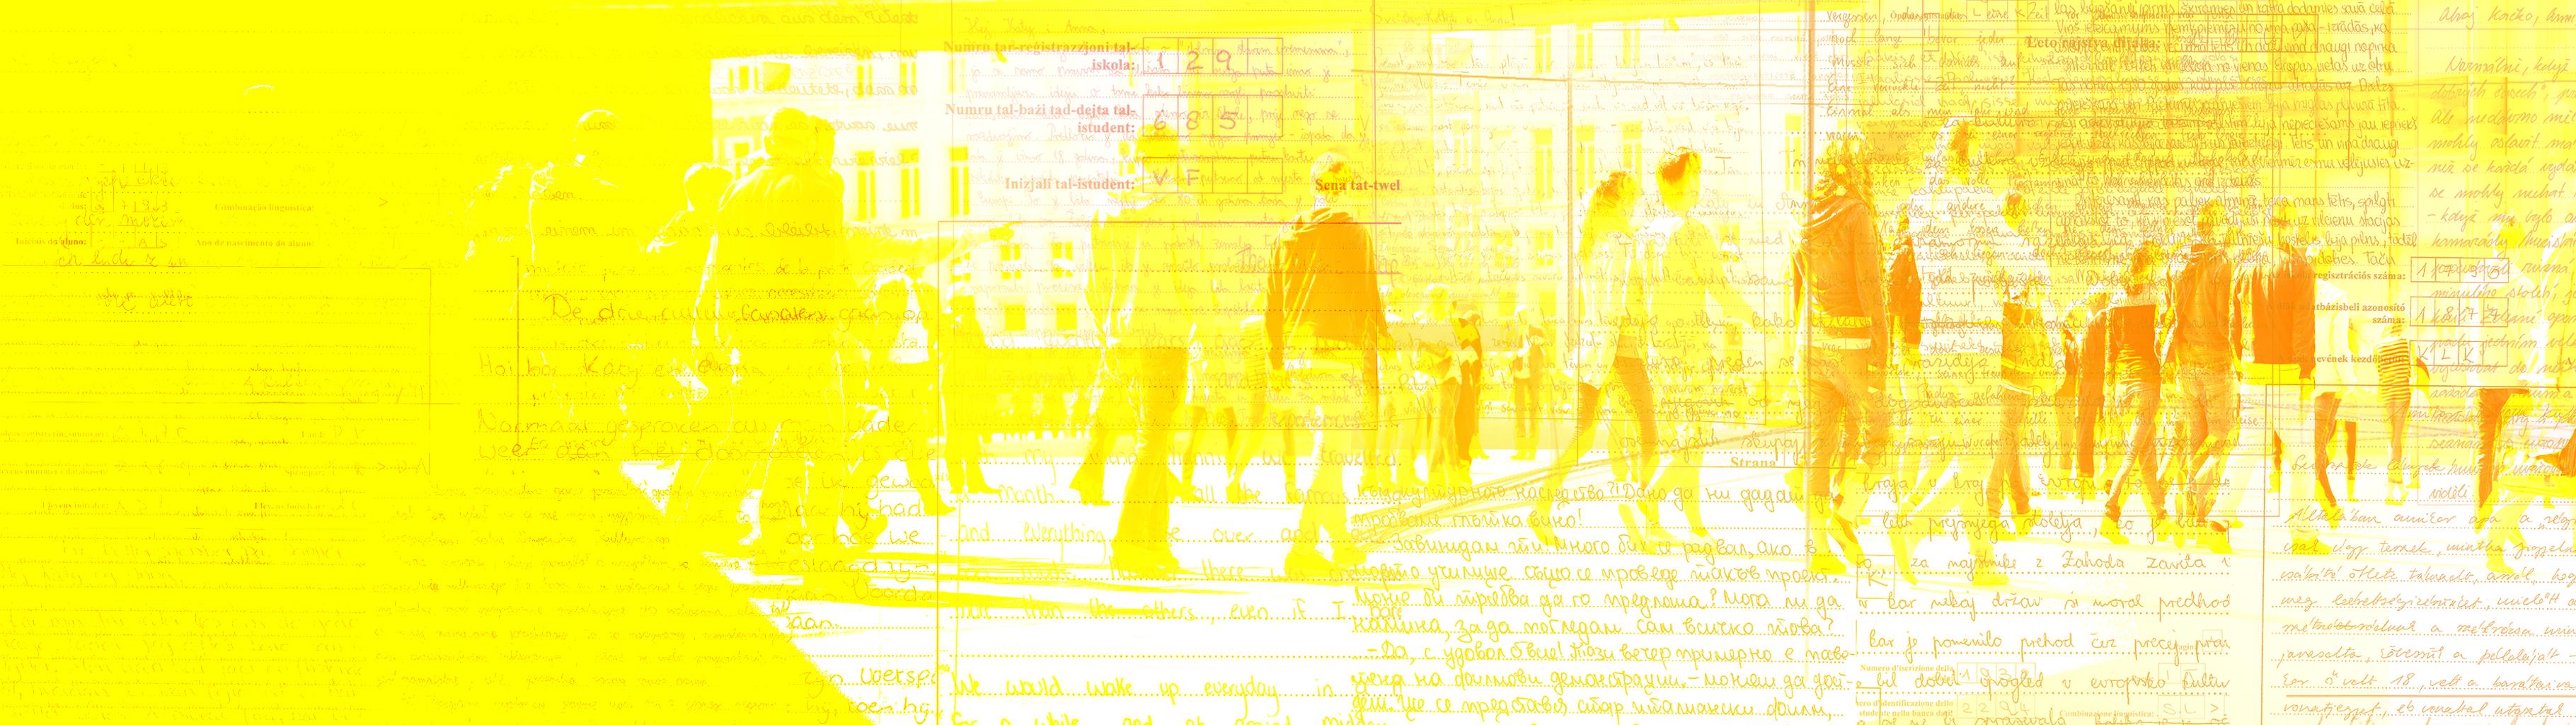 Young students walking in a city yellow background